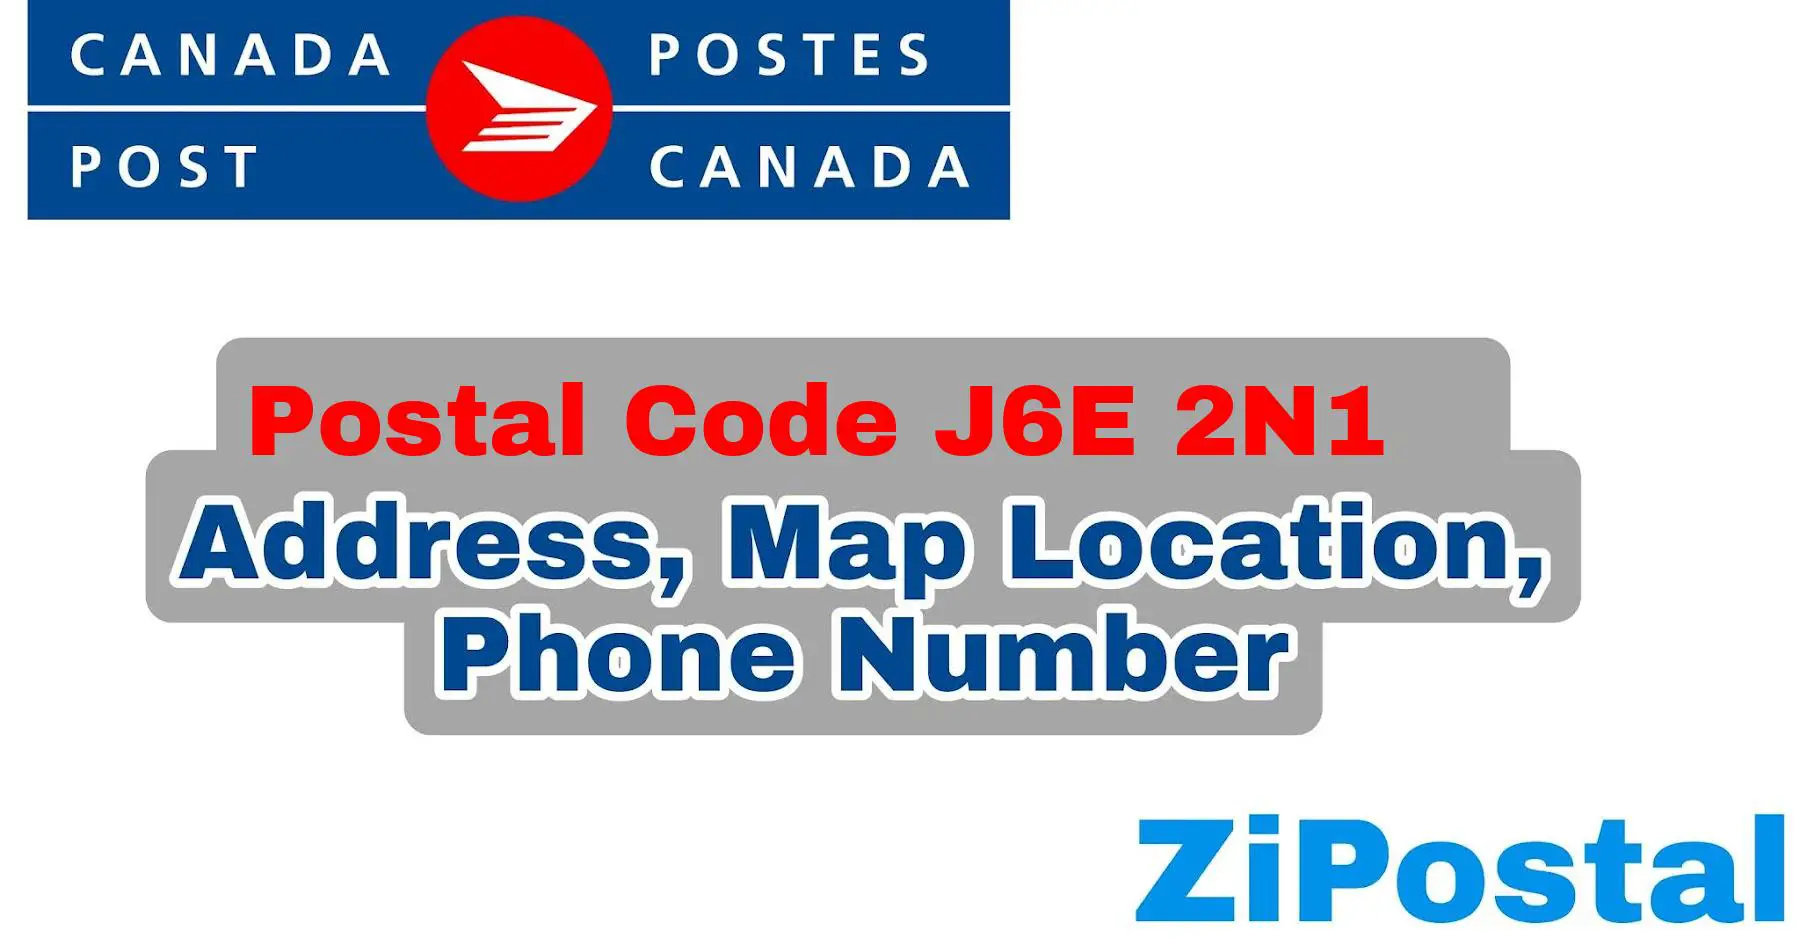 Postal Code J6E 2N1 Address Map Location and Phone Number